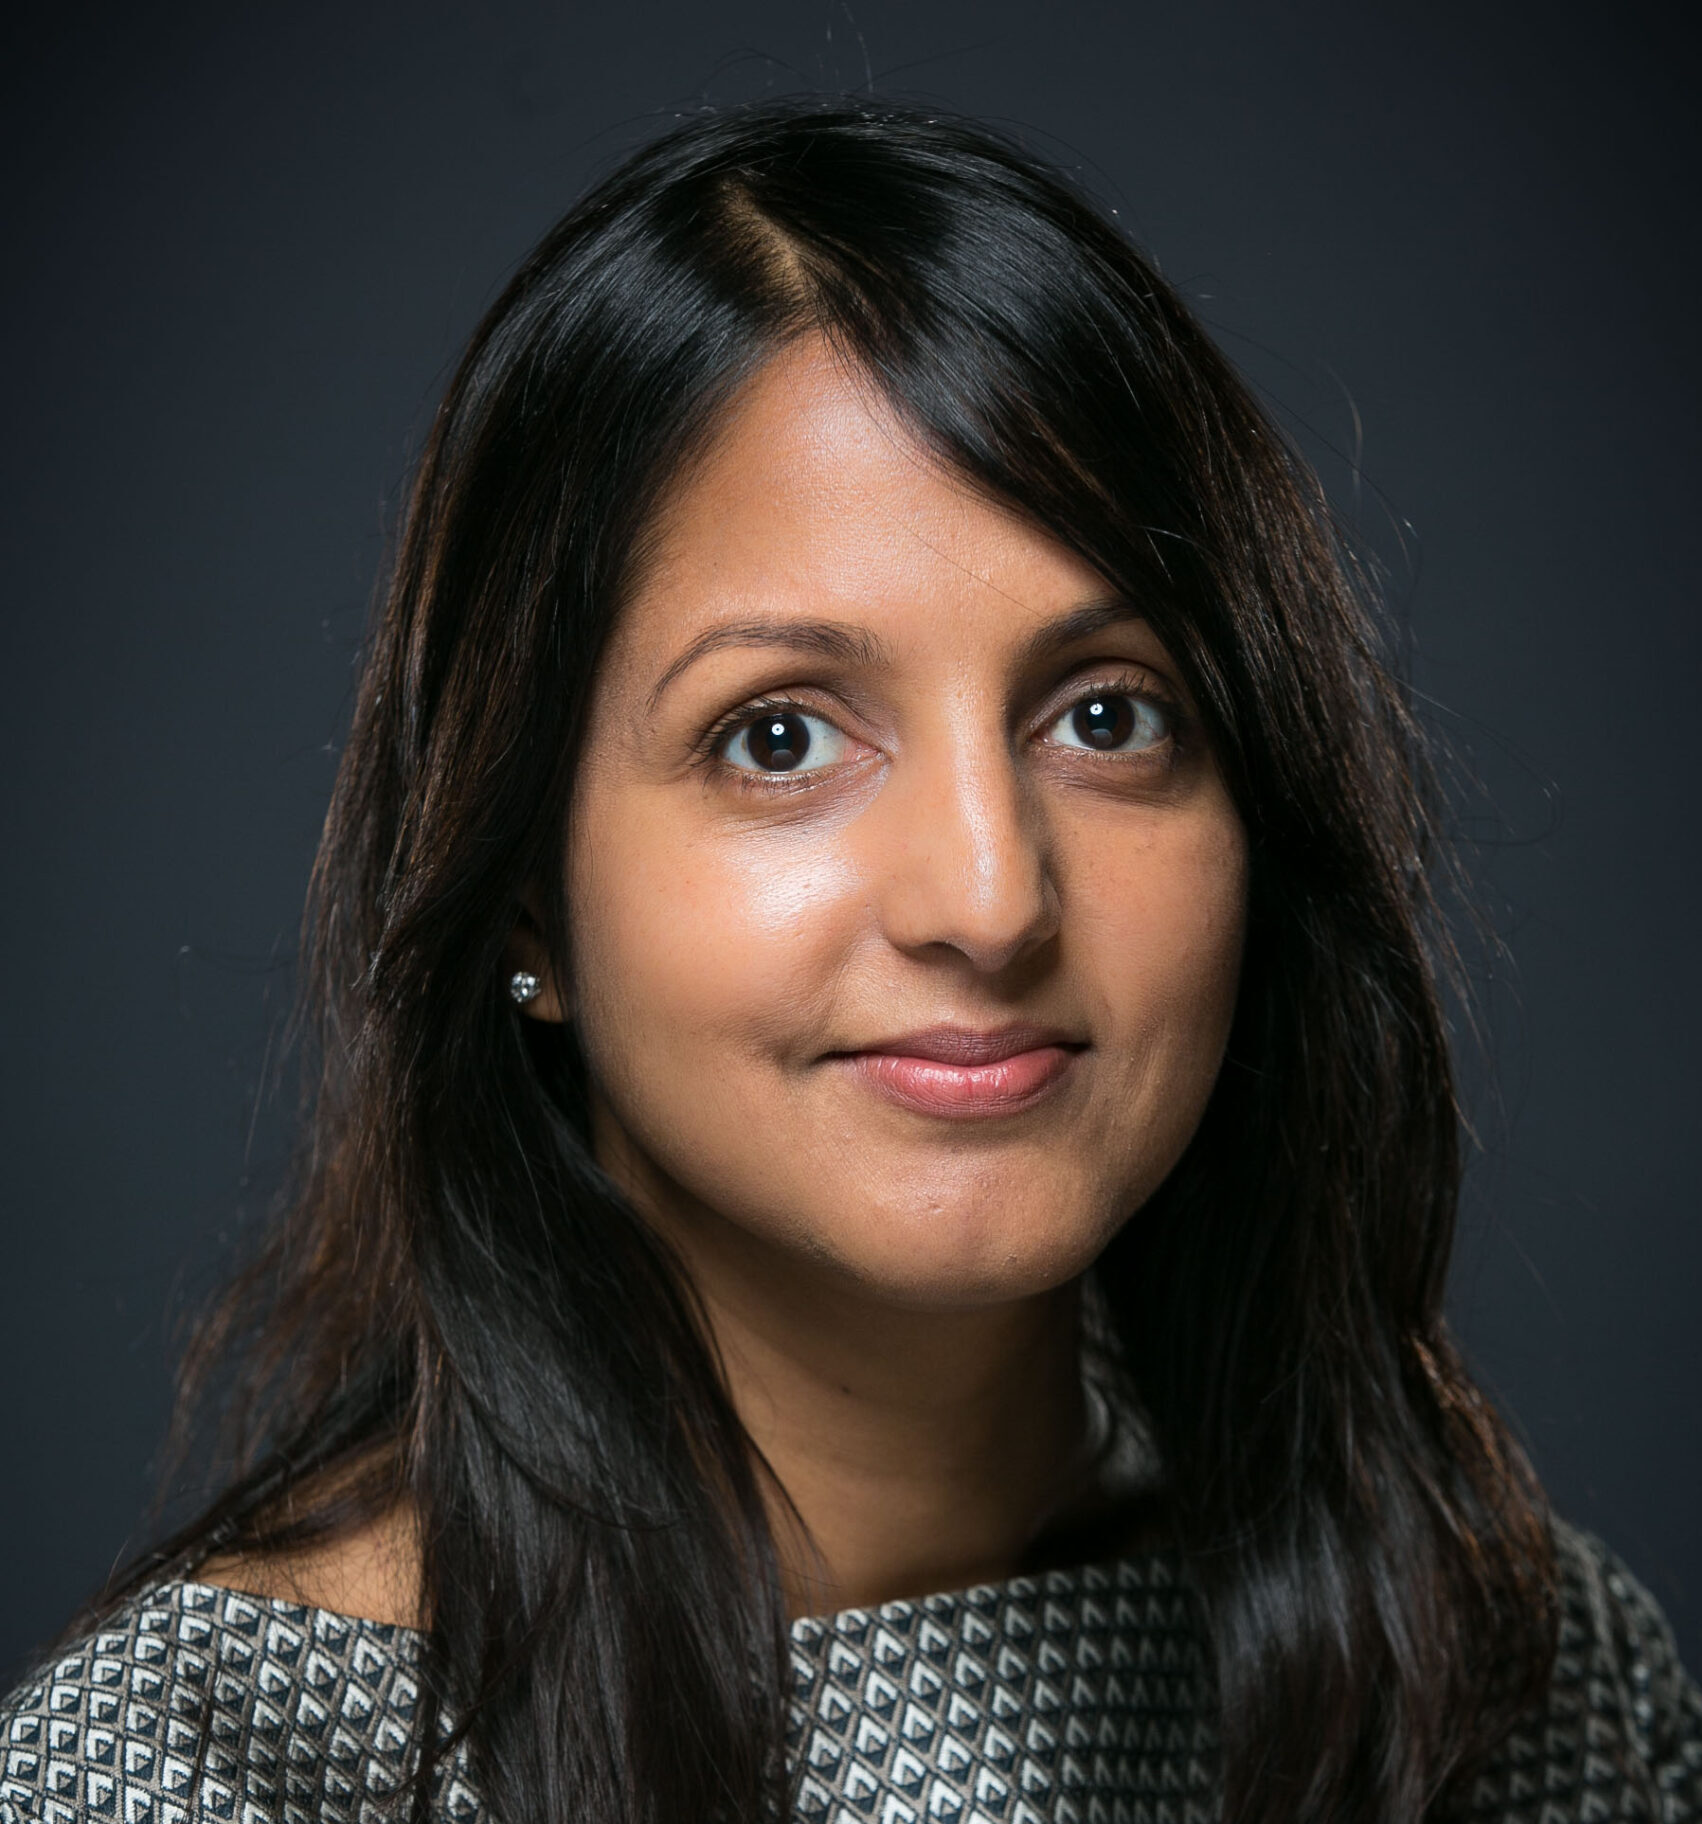 Divya Patel is an associate professor at the University of Texas System Population Health.